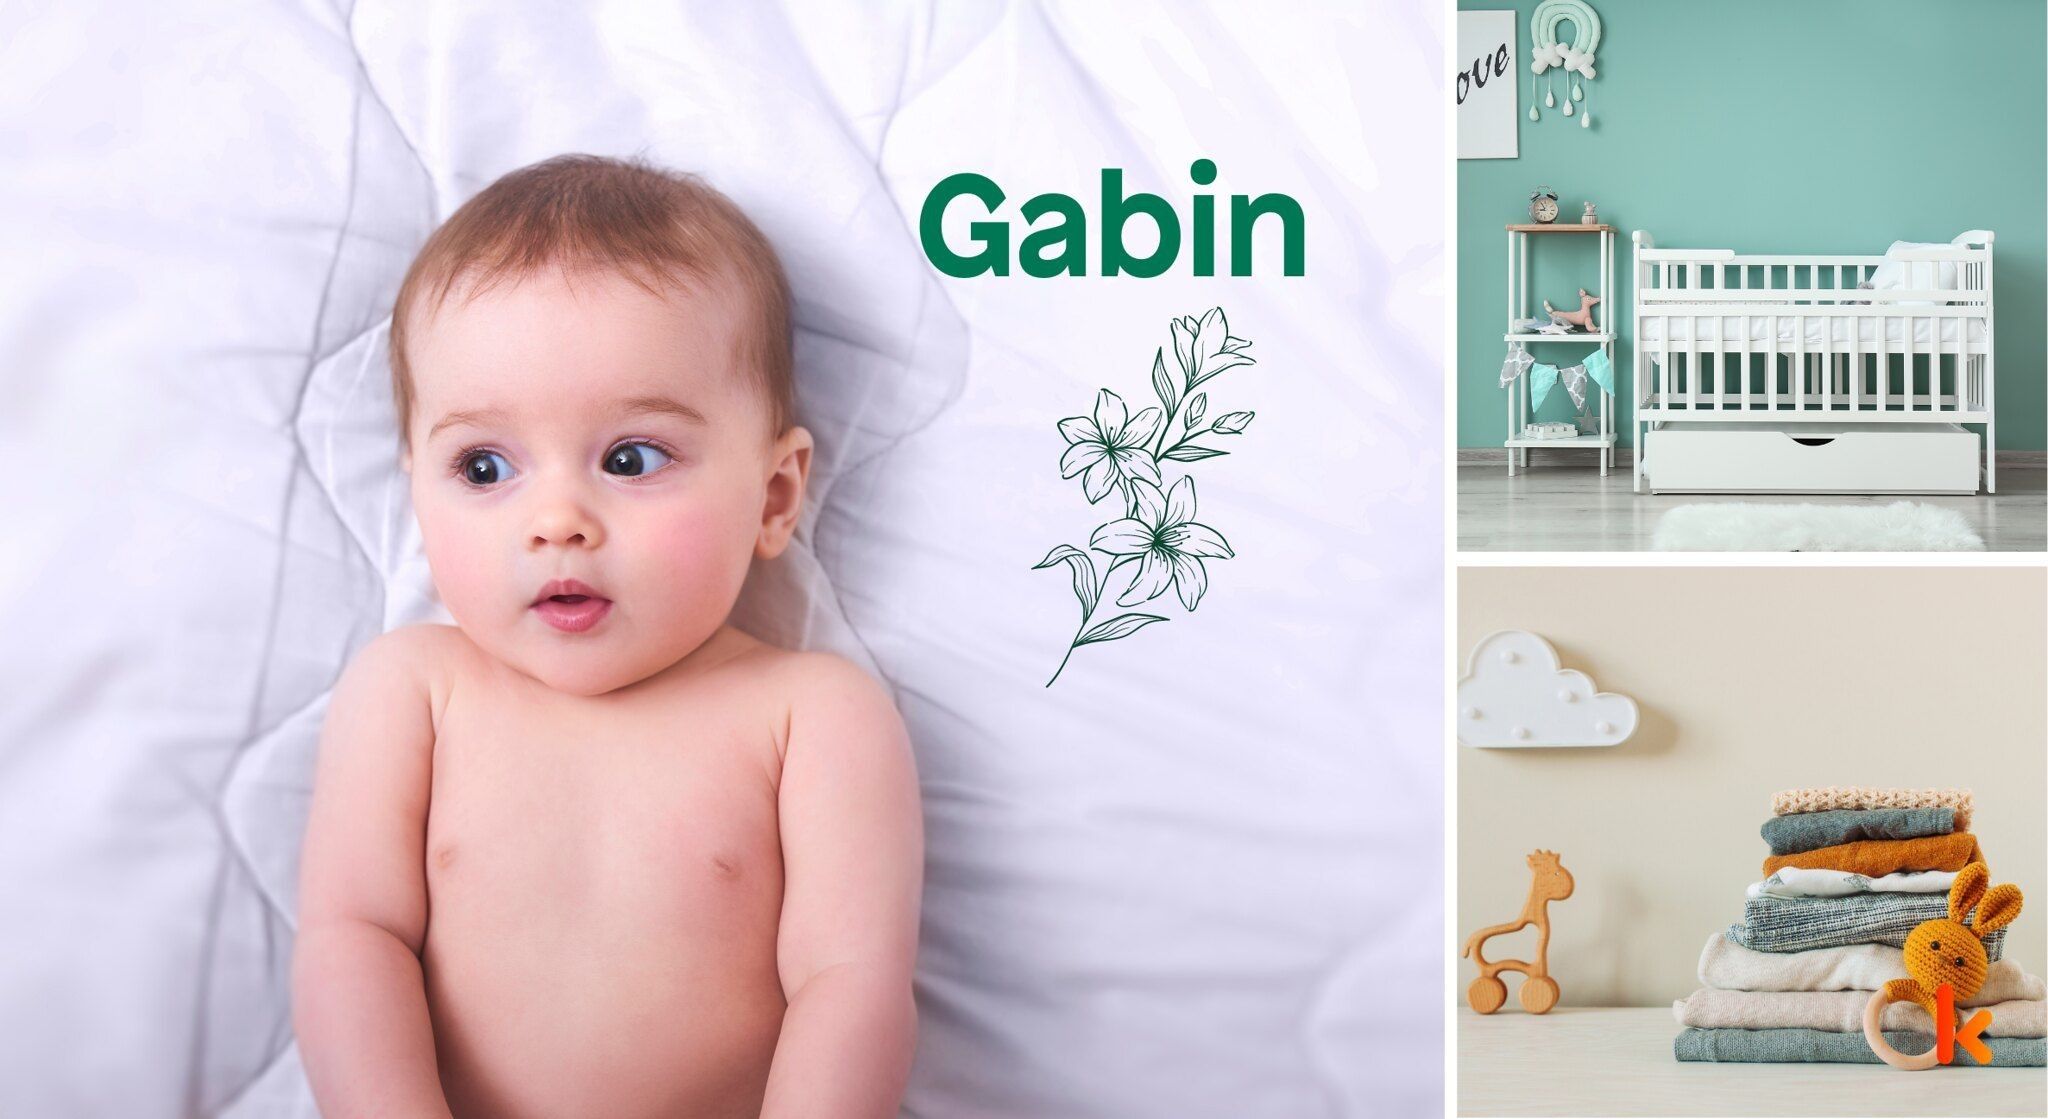 Meaning of the name Gabin